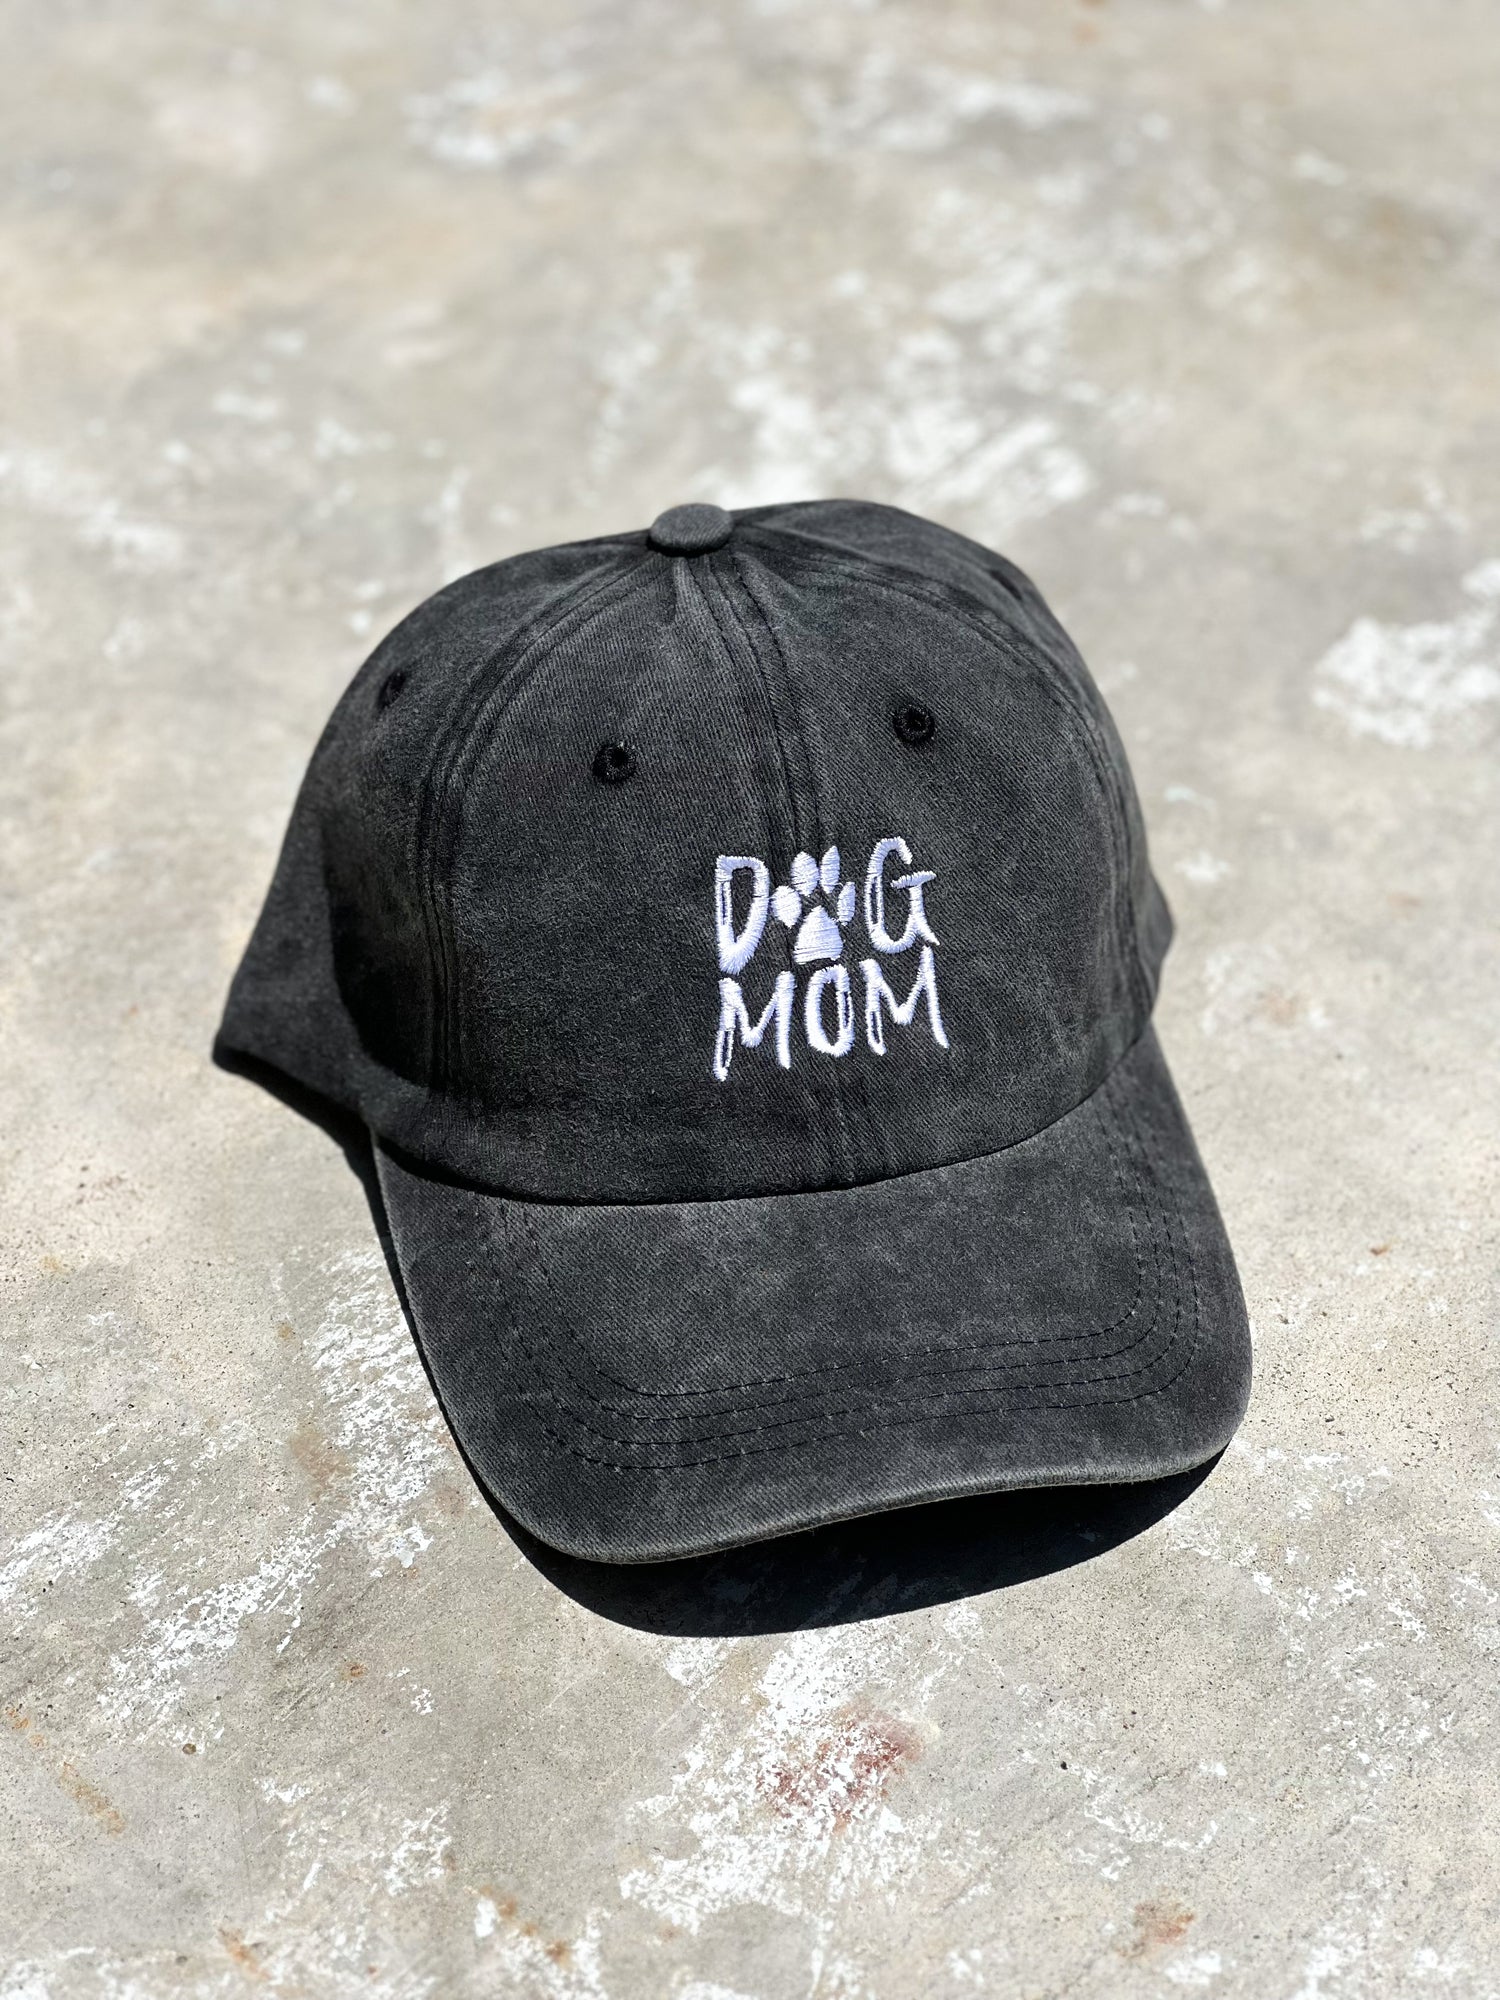 There's a black baseball distressed cotton cap with "Dog Mom" printed on the front of the cap. It's laying on the gray concrete floor.